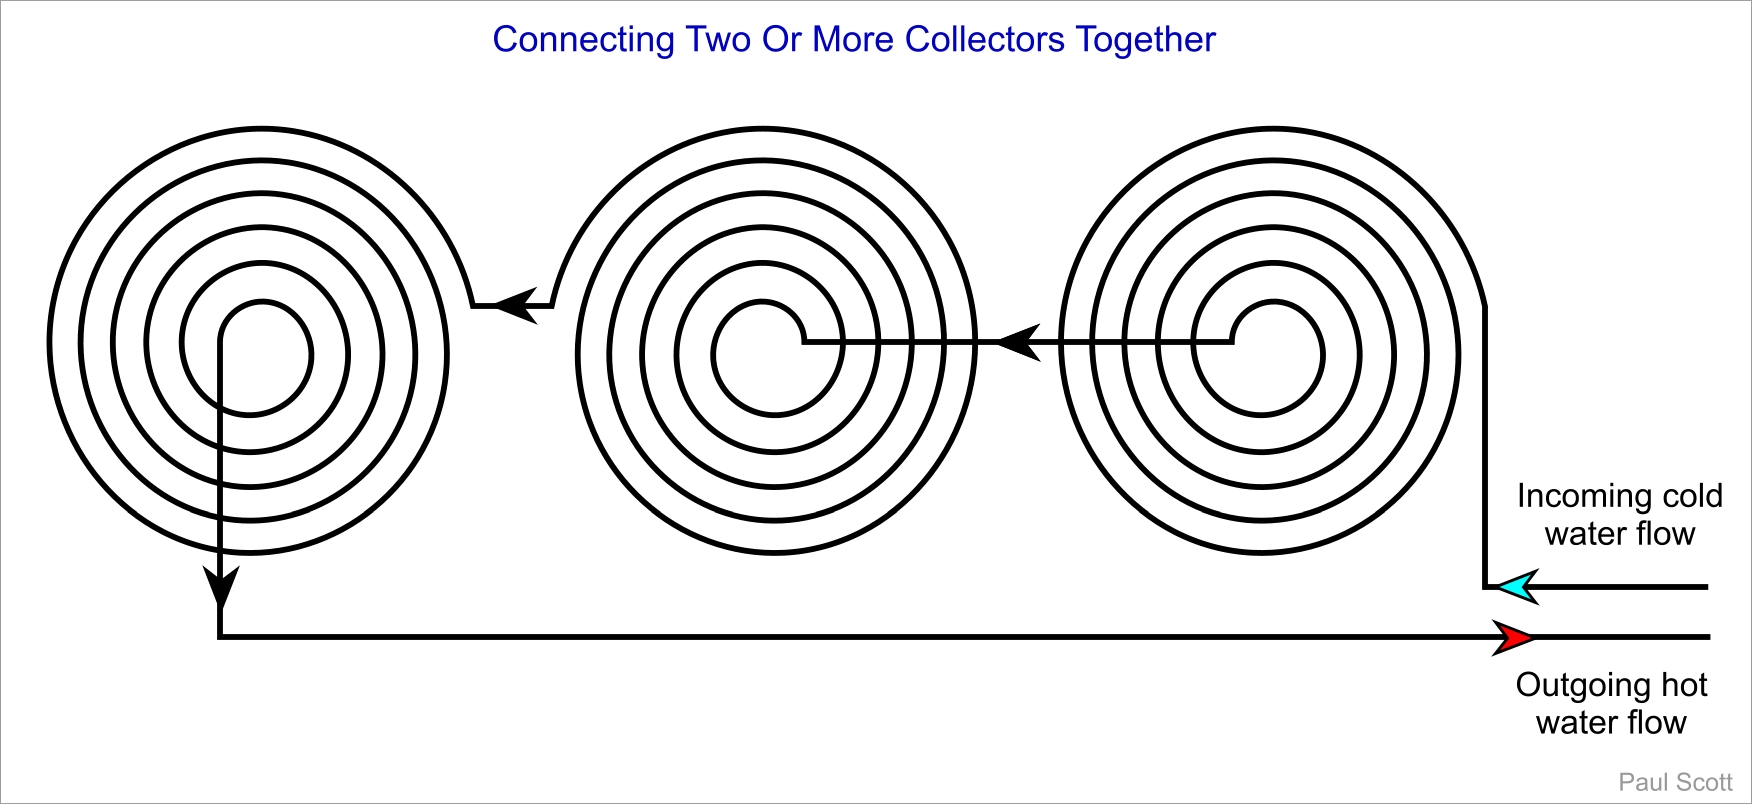 Connecting Two or More Collectors Together